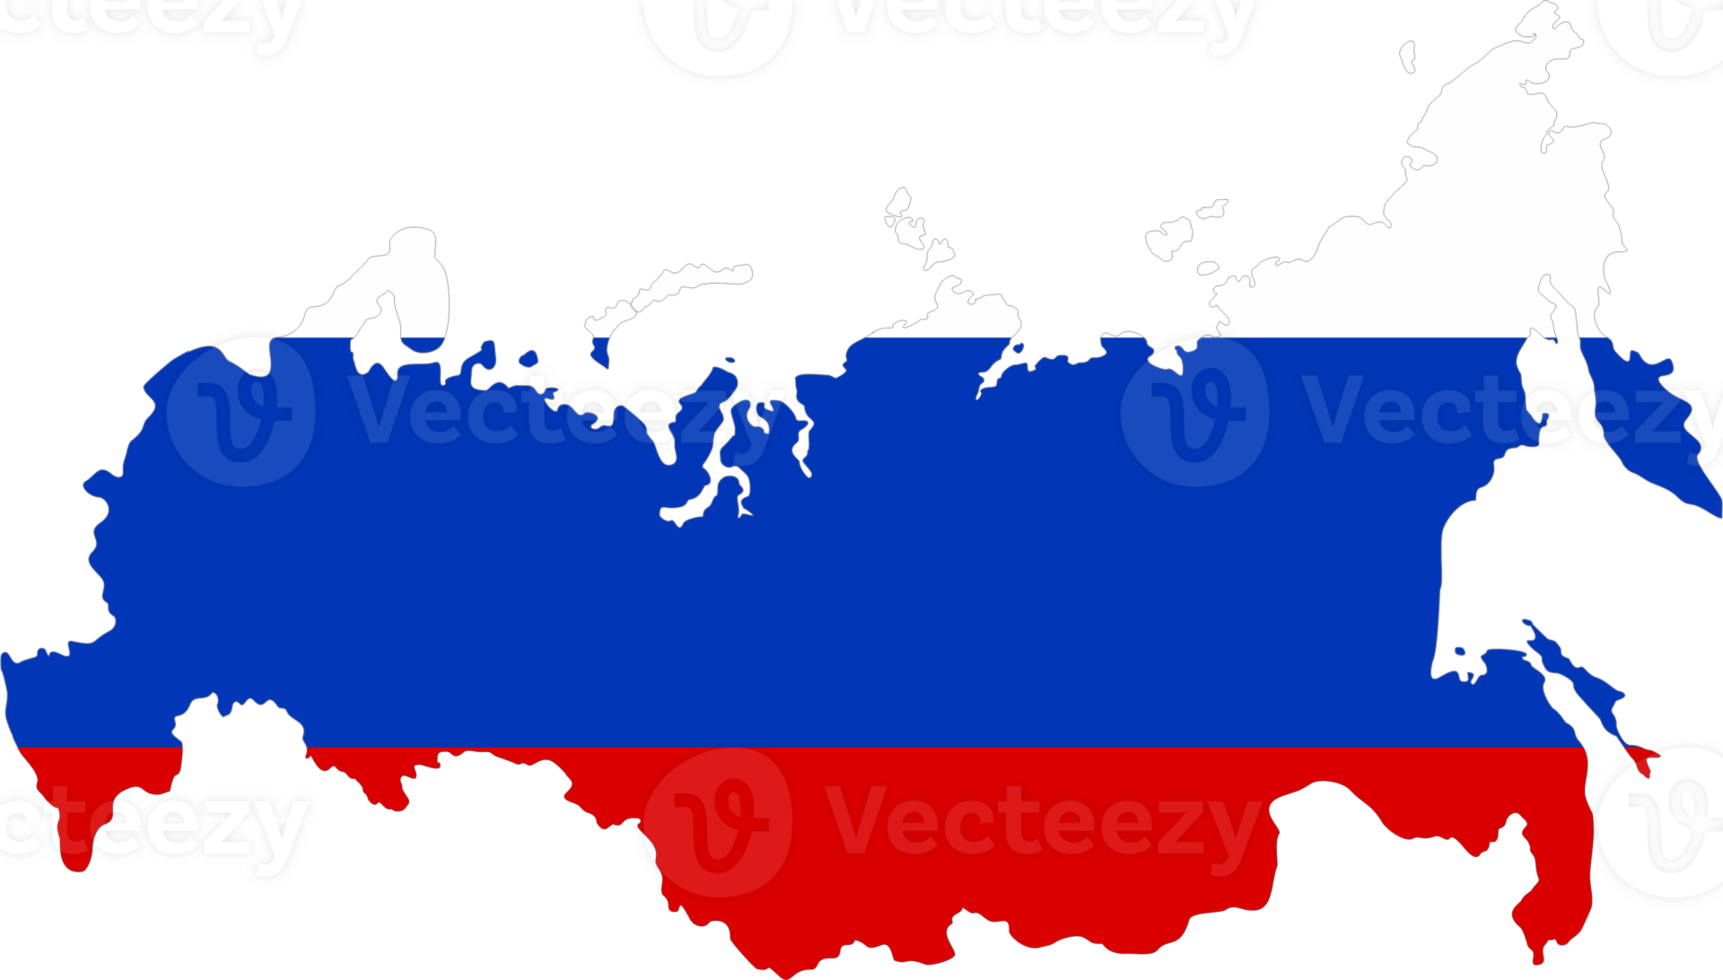 Russia flag pin map location 23529955 PNG